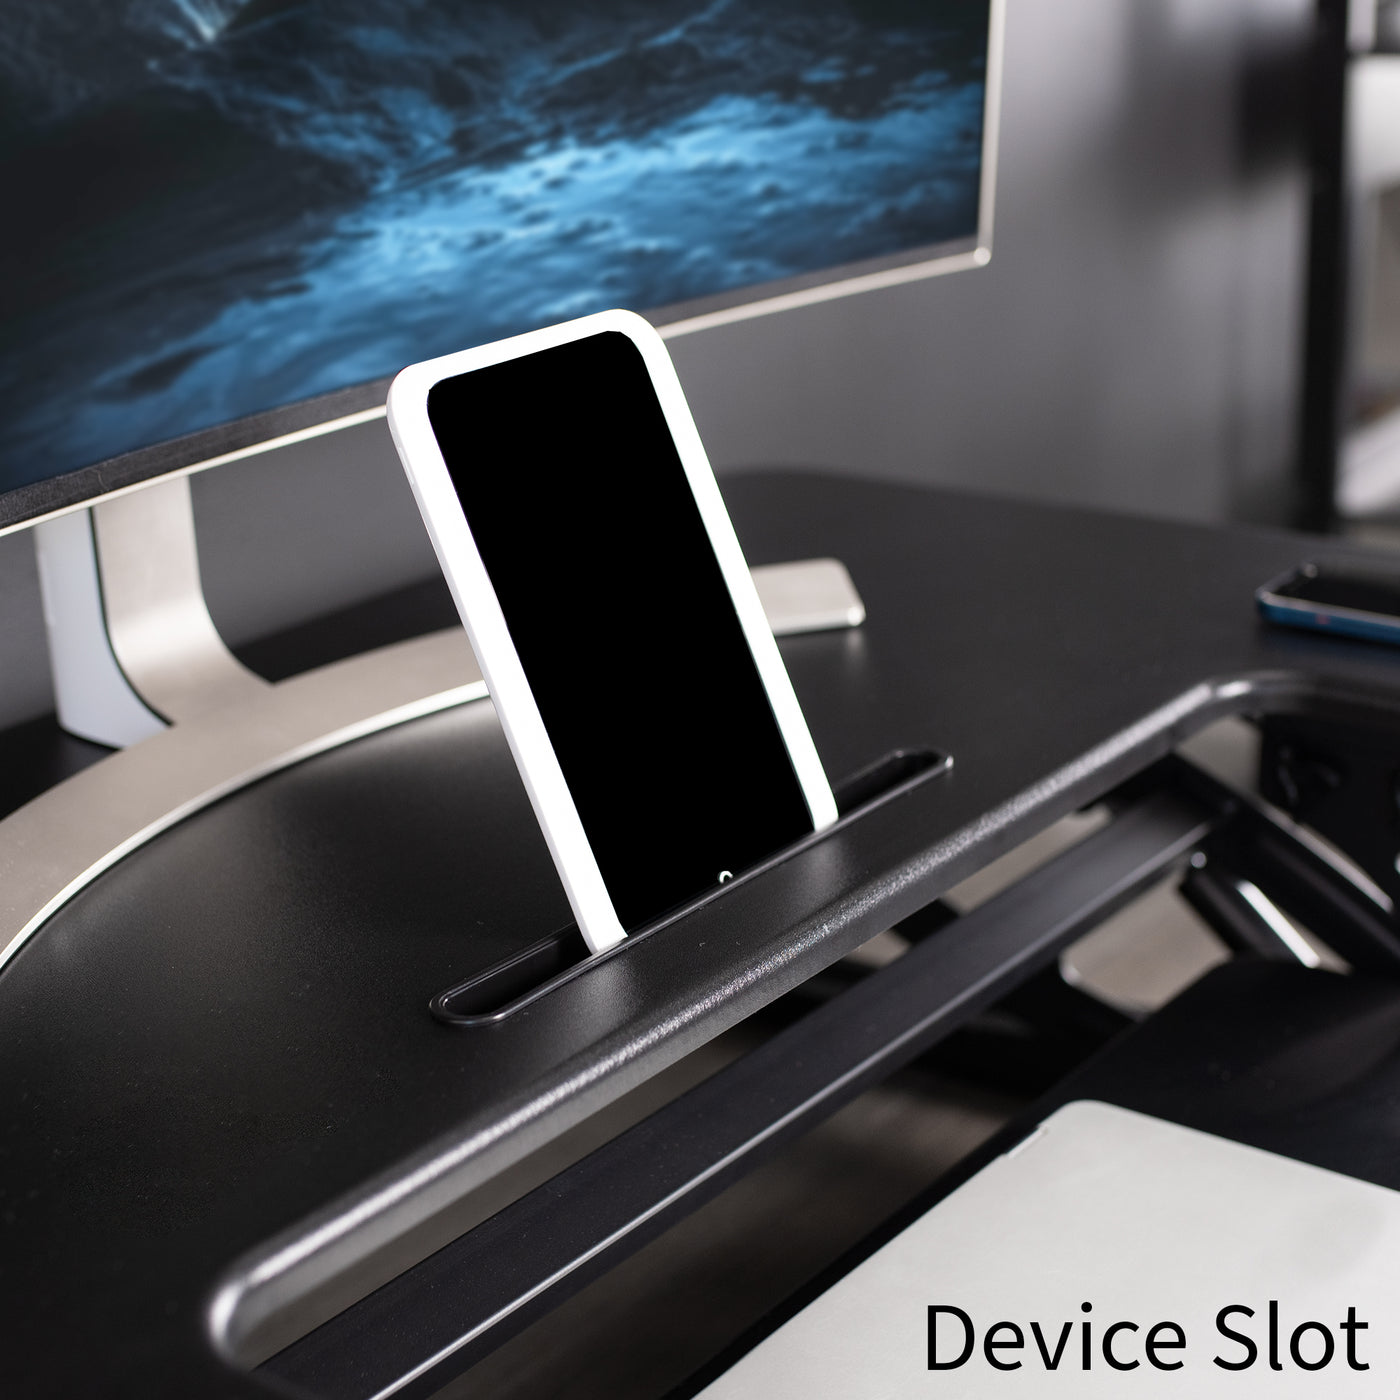 Device slot provided on the main desktop for convenience while working.